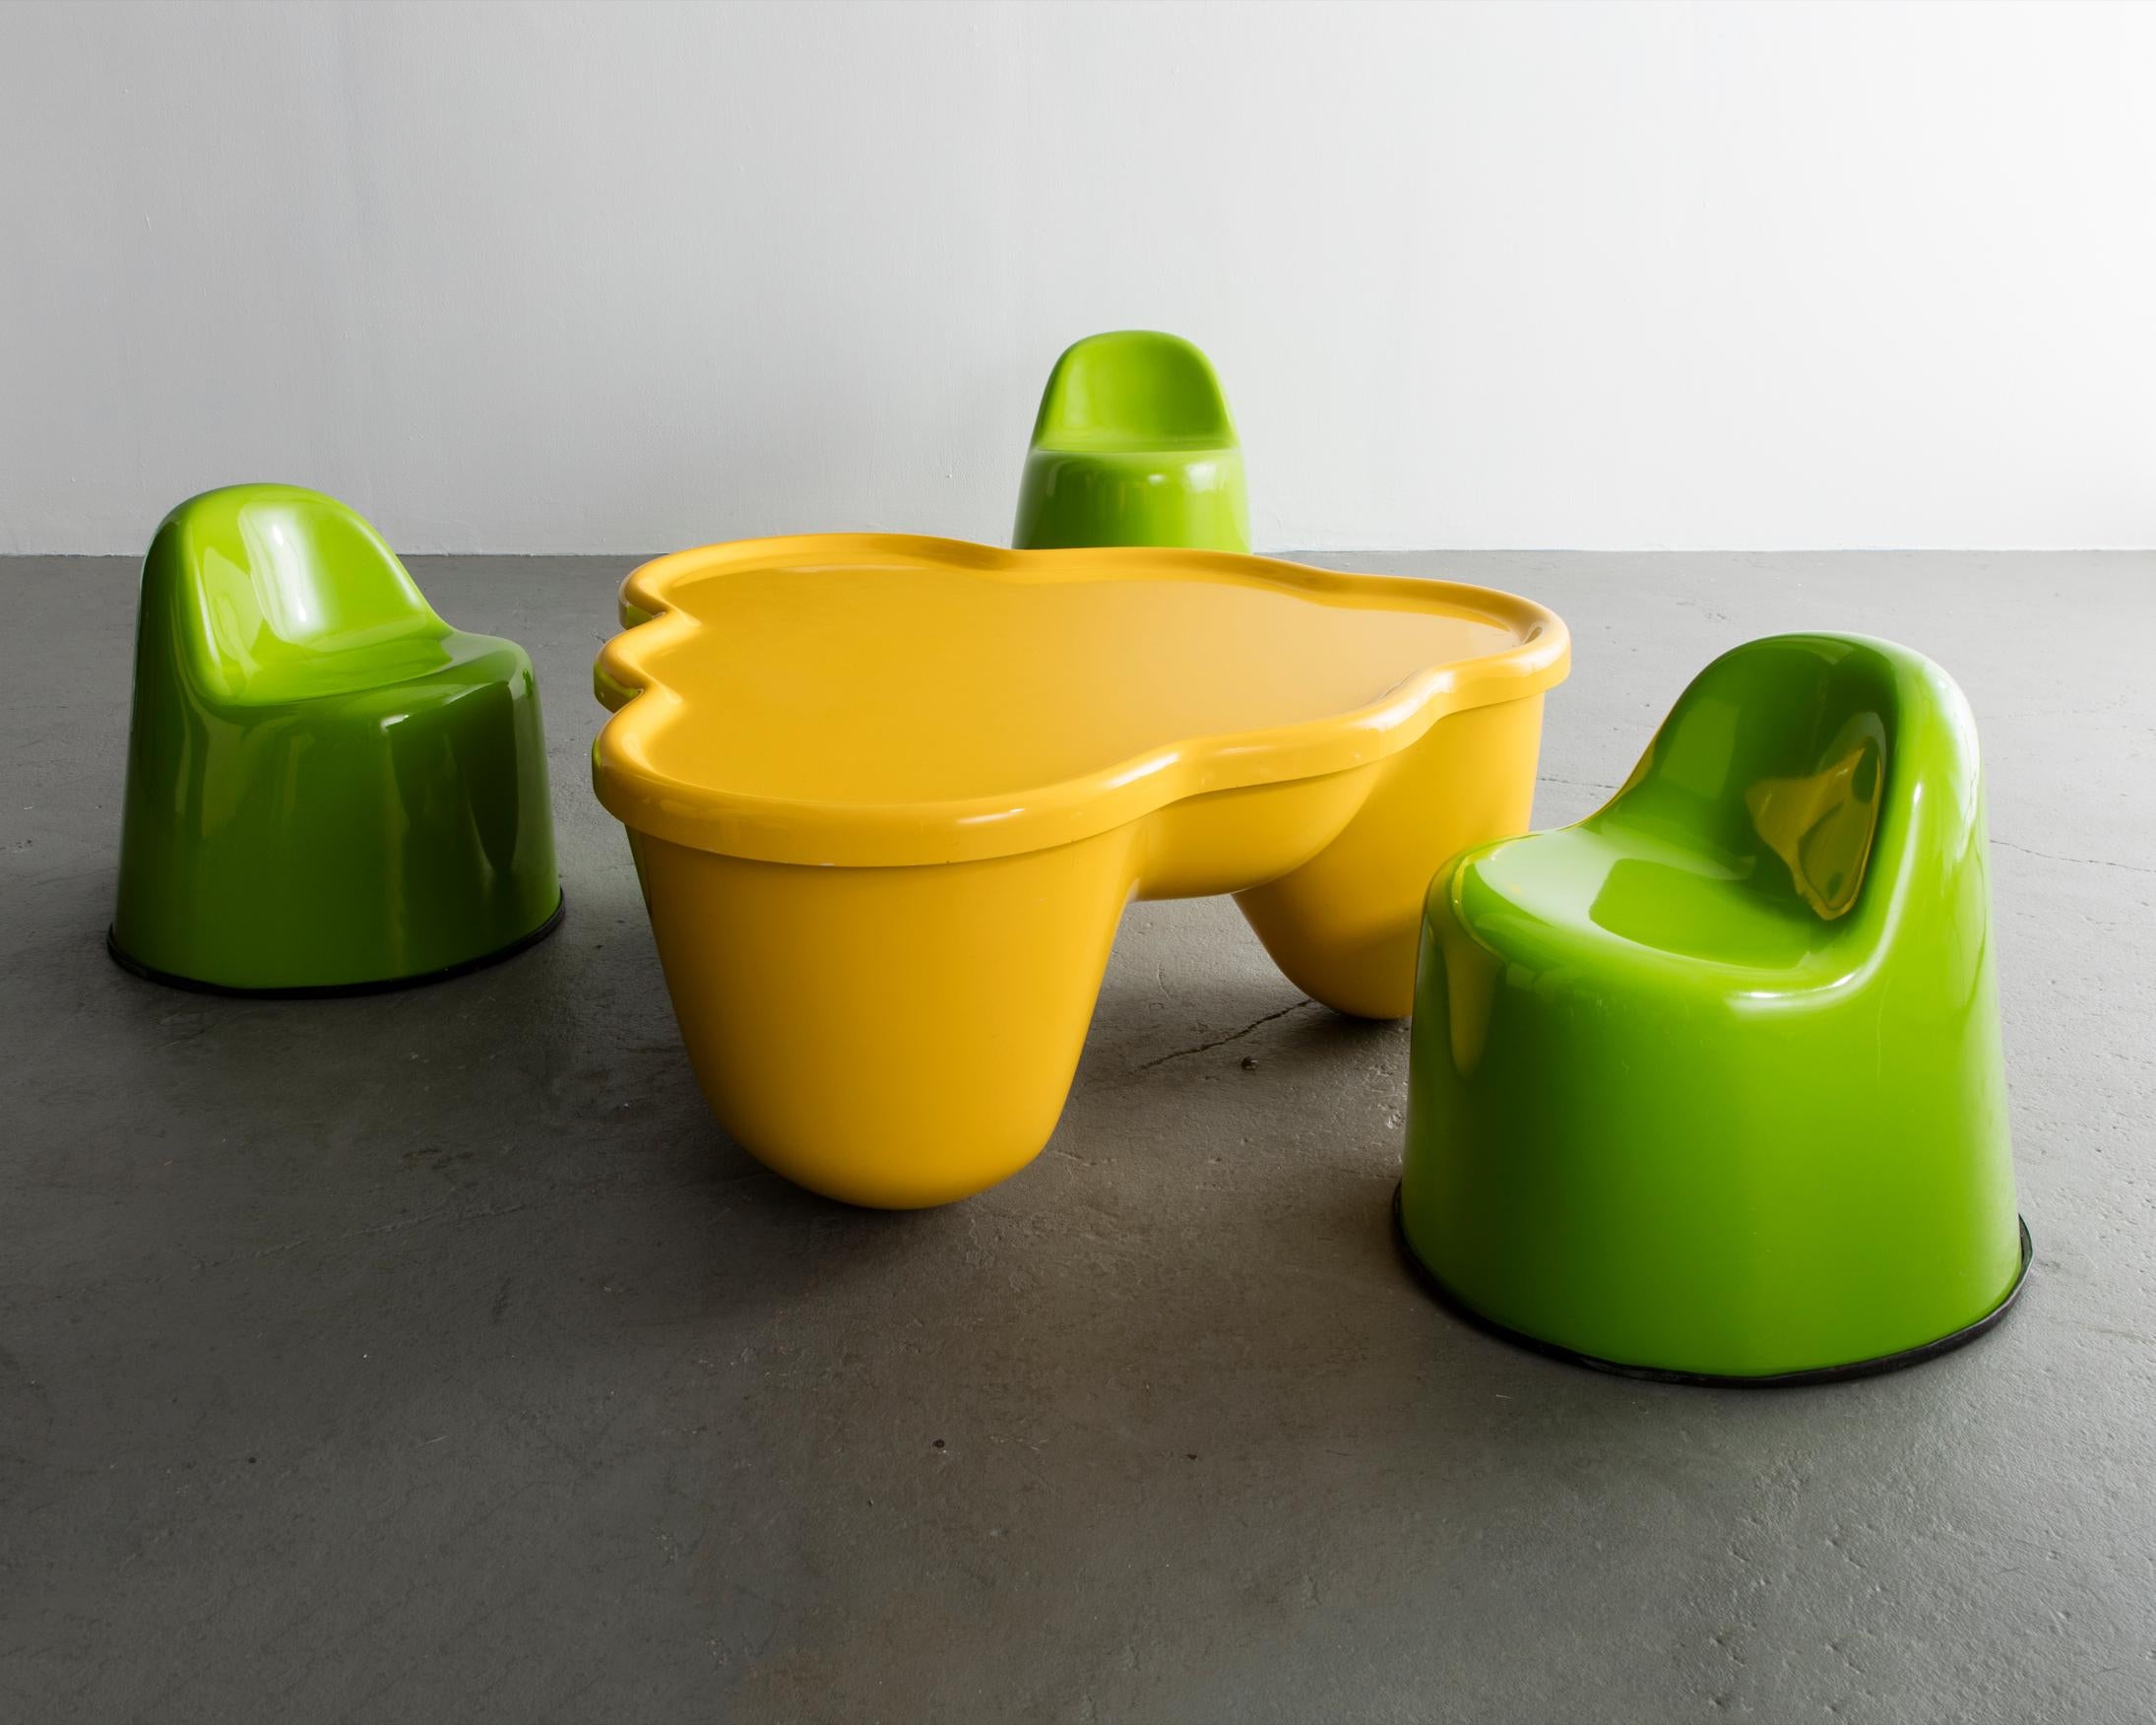 American Baby Molar Chair in Lime Green Plastic by Wendell Castle, 1971 For Sale